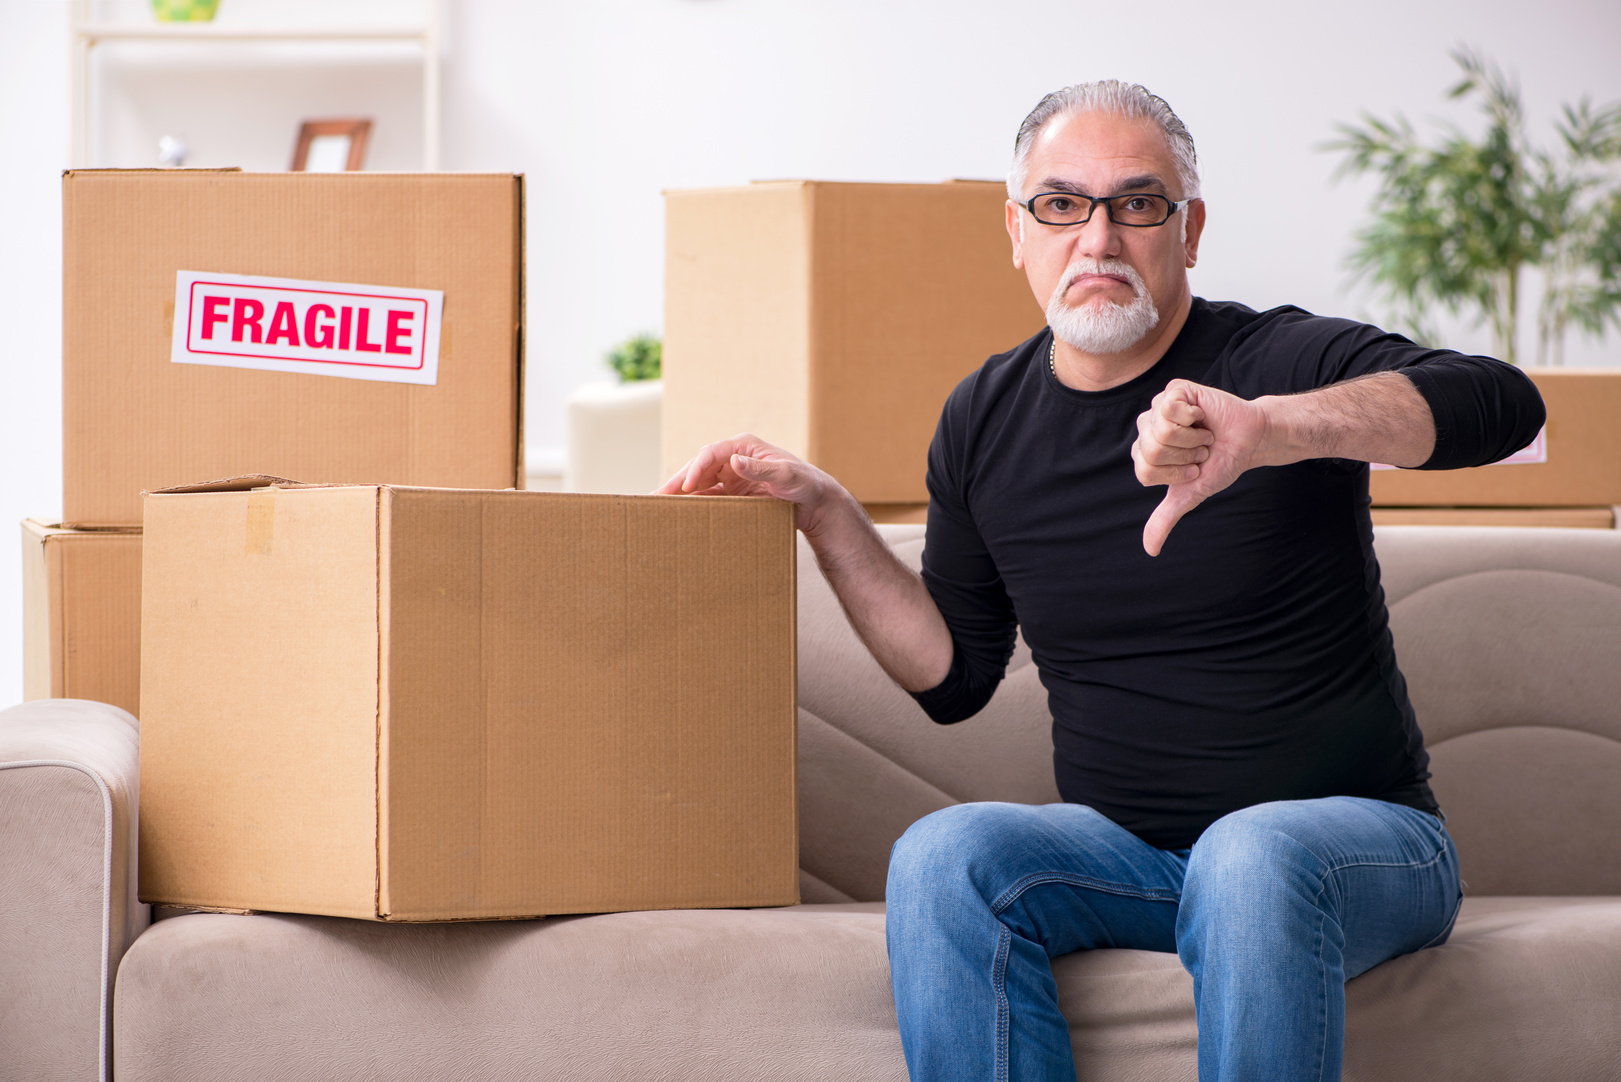 Man surrounded by boxes gives the thumbs down